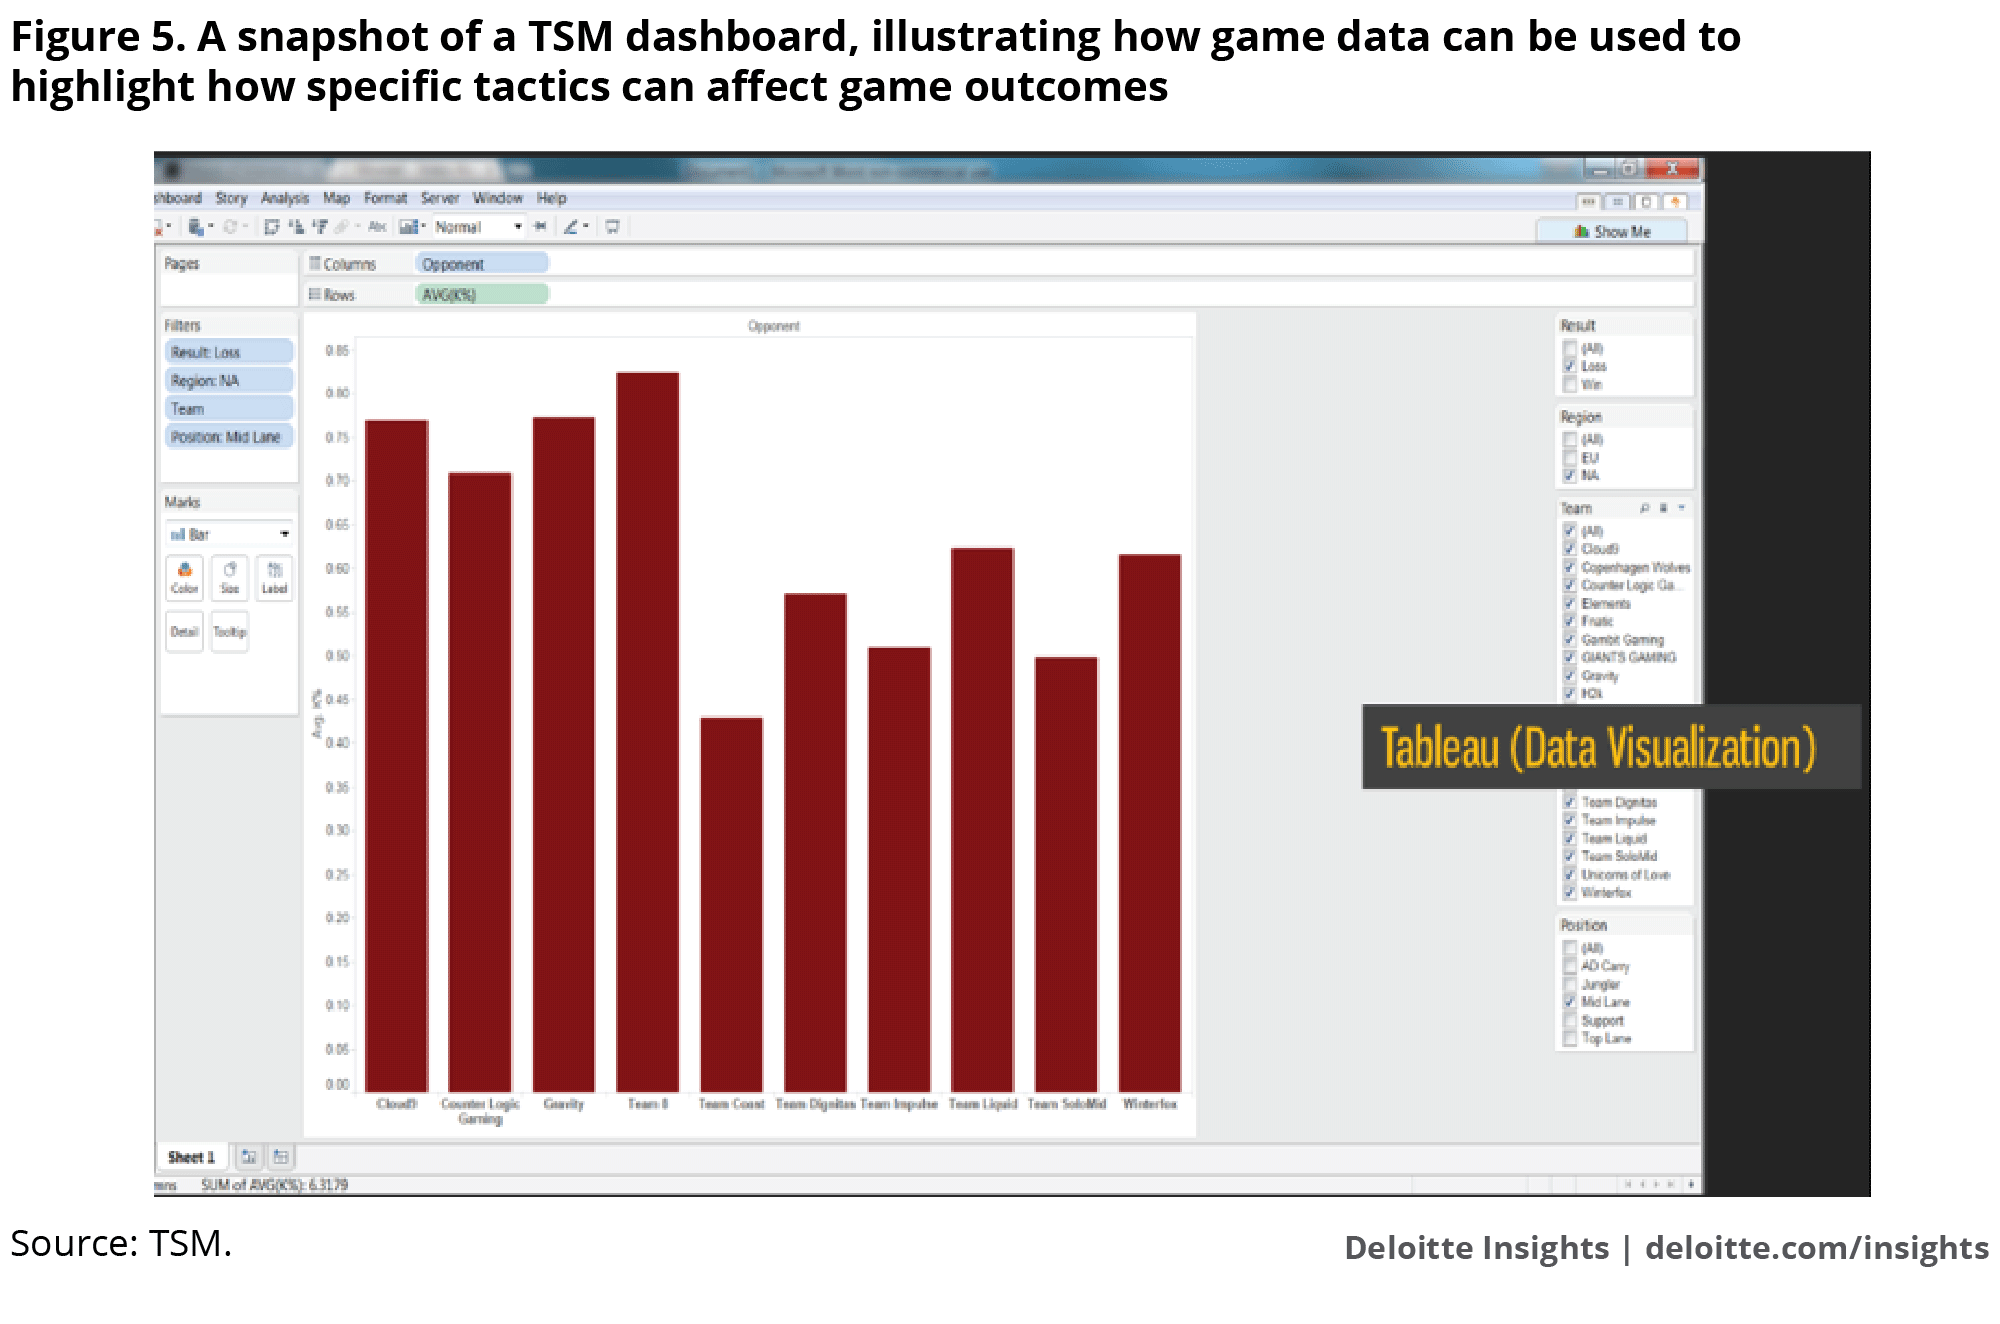 A snapshot of a TSM dashboard, illustrating how game data can be used to highlight how specific tactics can affect game outcomes